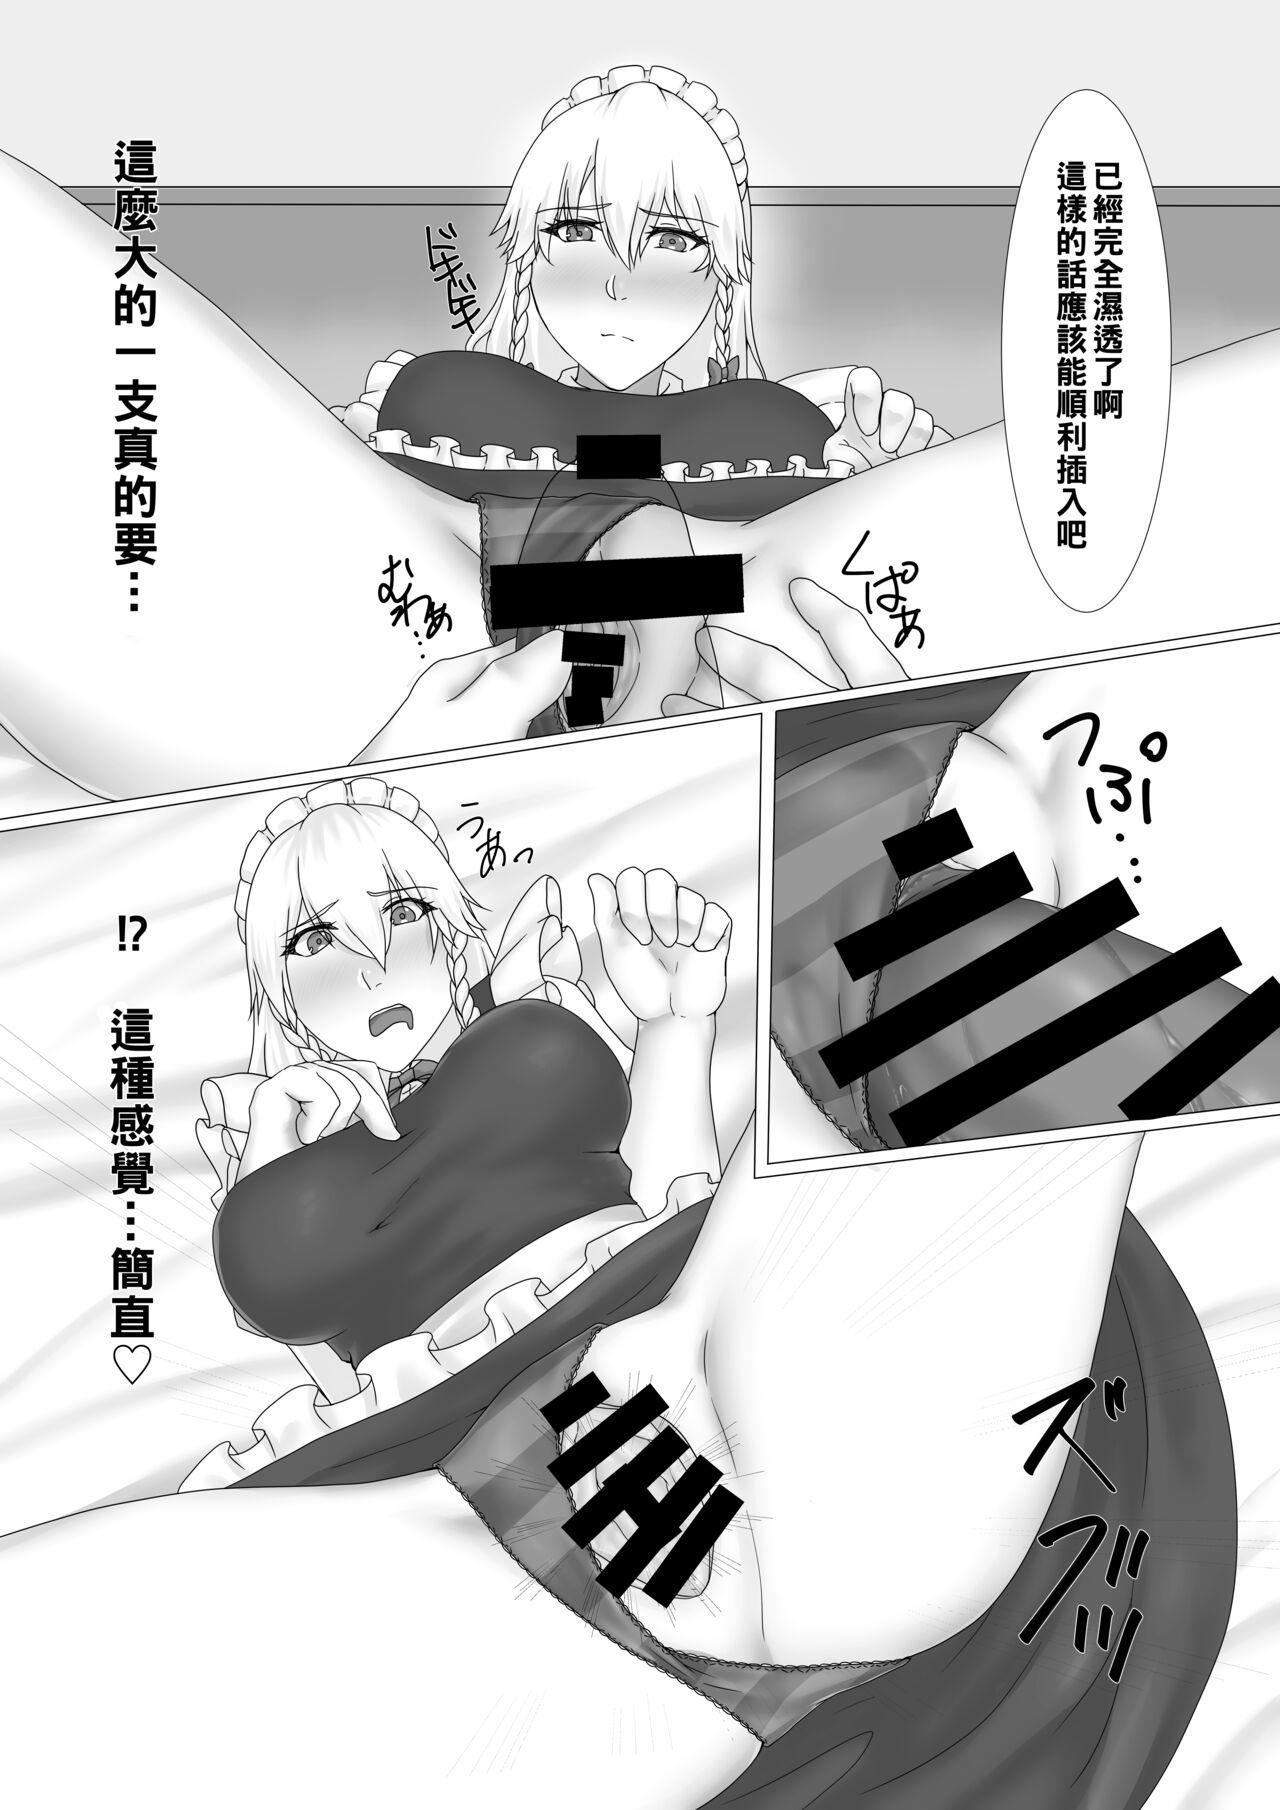 Spycam [糖質過多ぱると (只野めざし)] 咲夜さんとセフレになる本 (東方Project)（Chinese） - Touhou project Gay 3some - Page 8